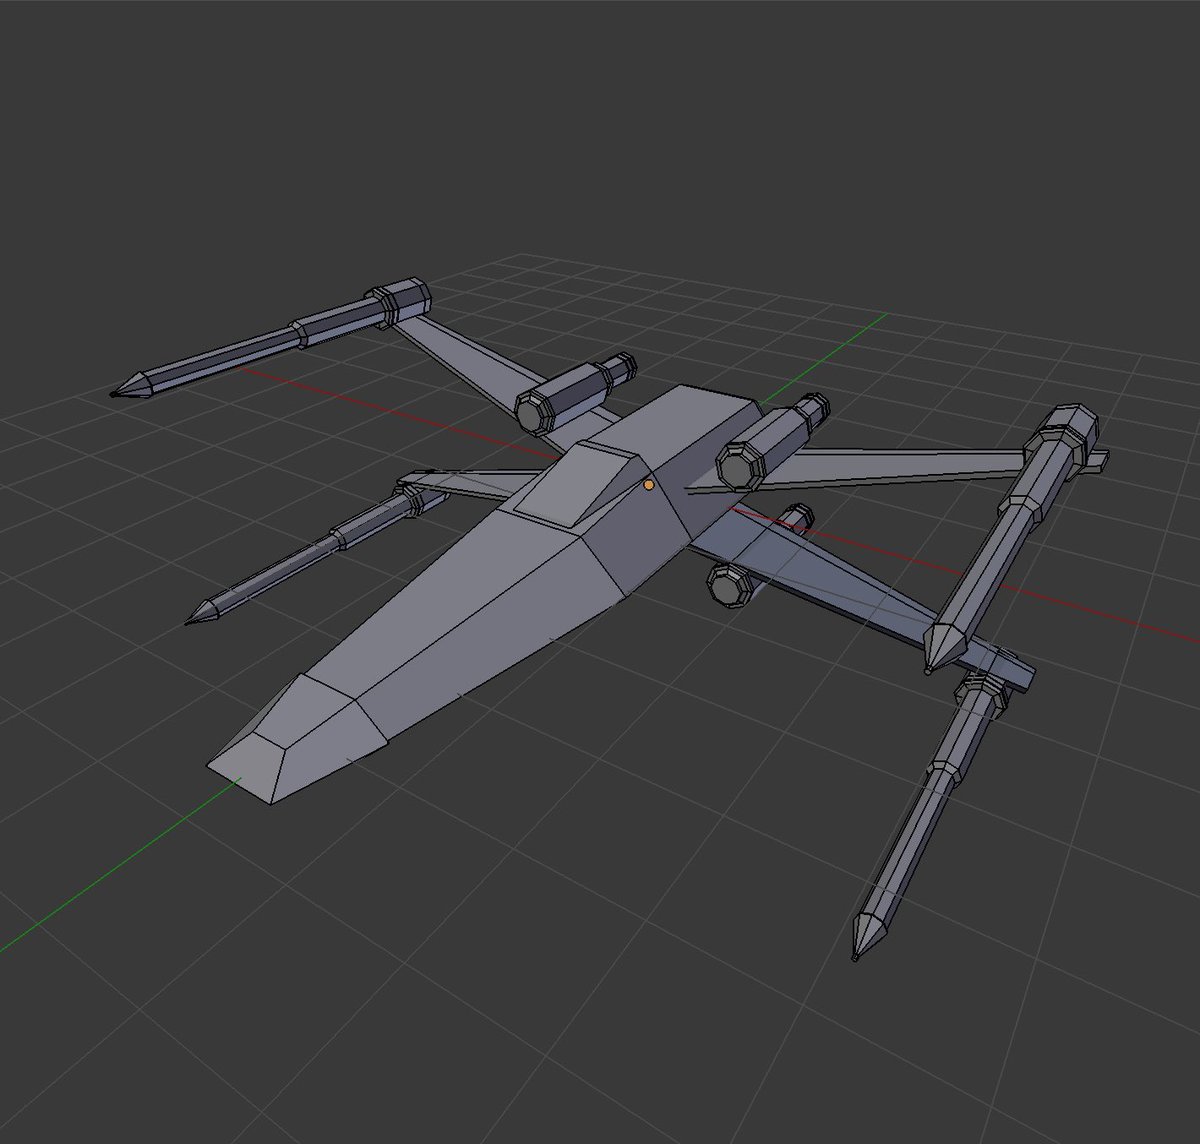 A very basic X-Wing from #starwars
#xwing #xwingfighter #blender3d #gamedev #indiedev #game #unity #unity3d #indiegame #developer #dev #gamedeveloper #indiegamedeveloper #lowpoly